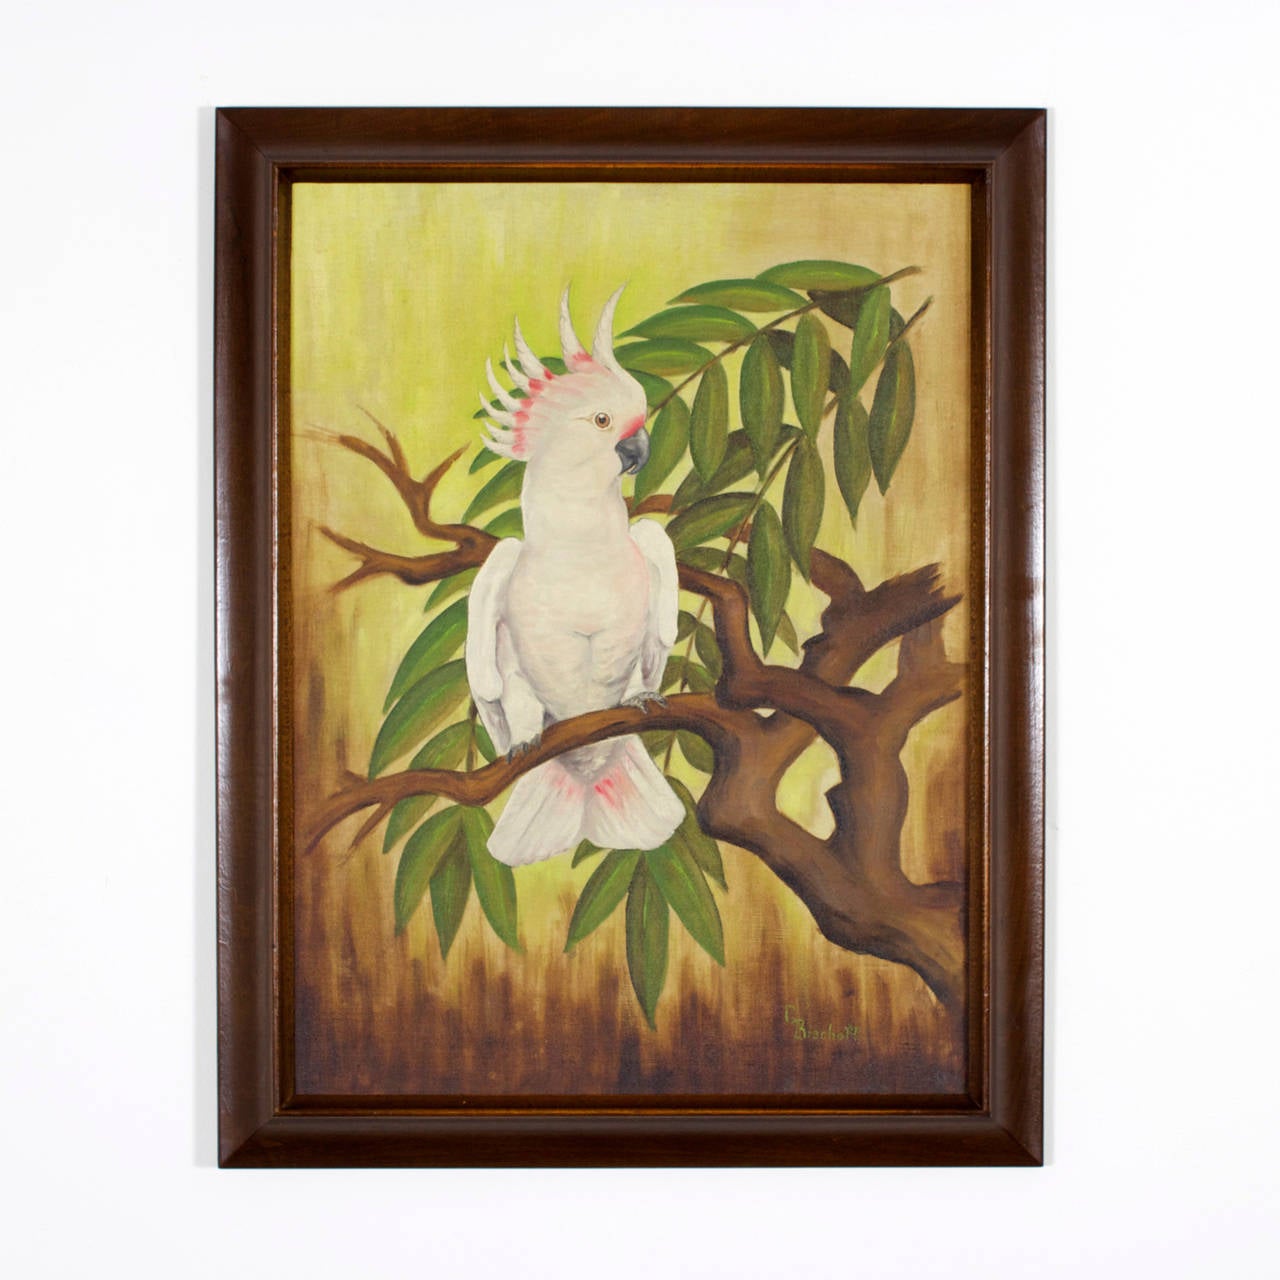 Set of 4 folky, colorful naive oil on canvas paintings of birds, including a parrot and toucan, perched in natural tropical environments signed Bishoff. Original frames. Large size adds appealing decorative value.